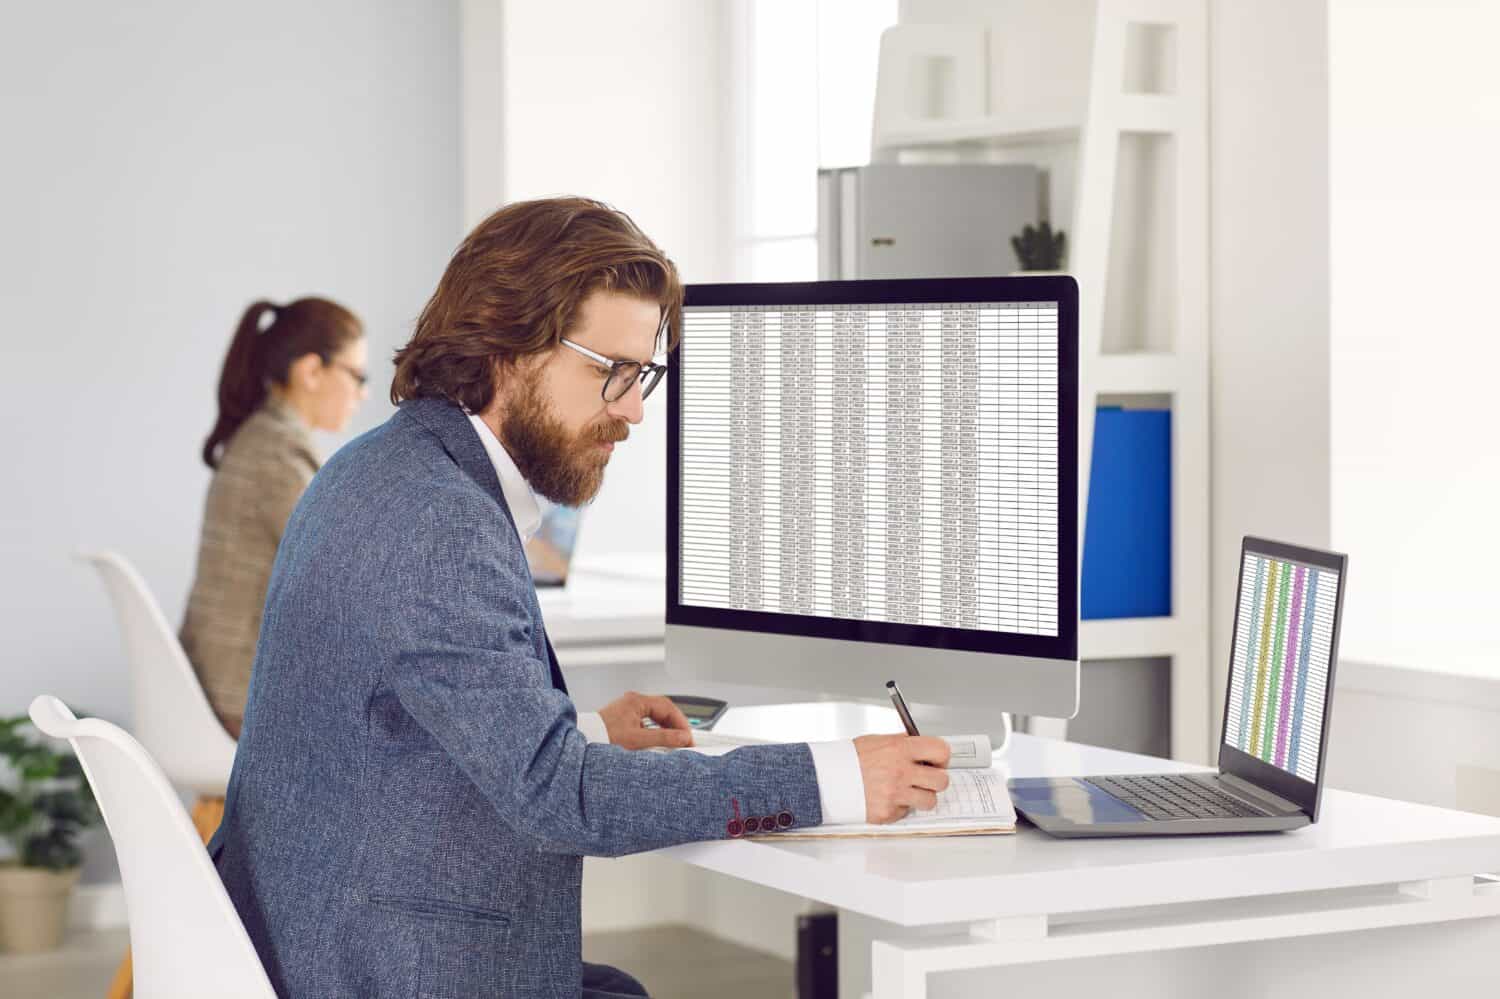 Adult Caucasian man works as accountant or auditor sits at table with monitor and laptop, fills out tables and makes entries in workbook calculating profits and taxes located in open space office